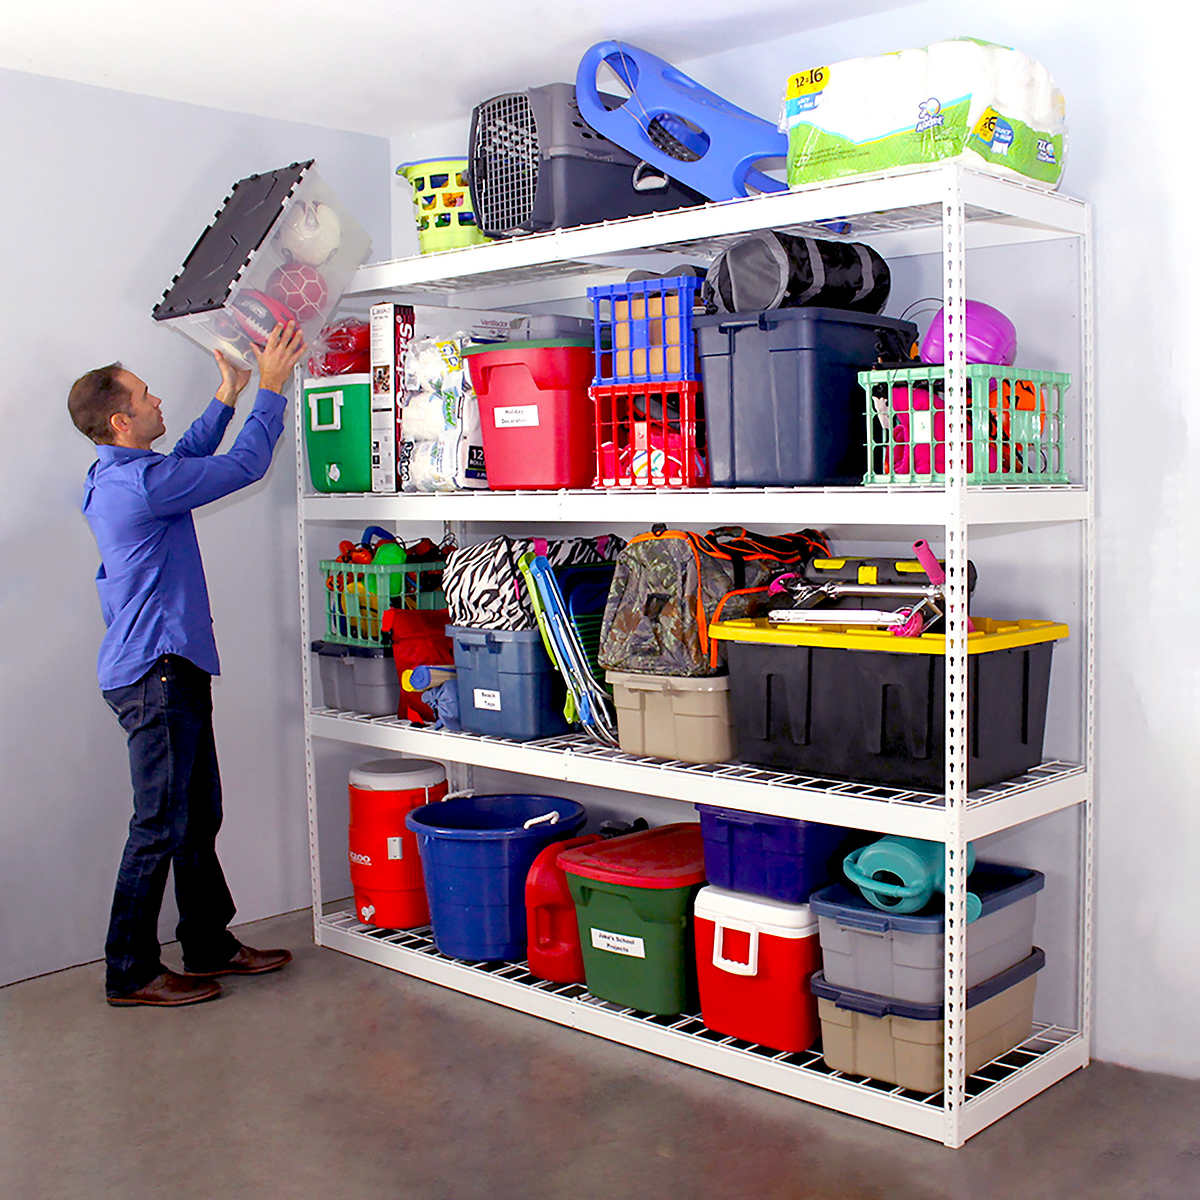 Saferacks Garage Shelving Costco, How To Install Wire Shelving Garage